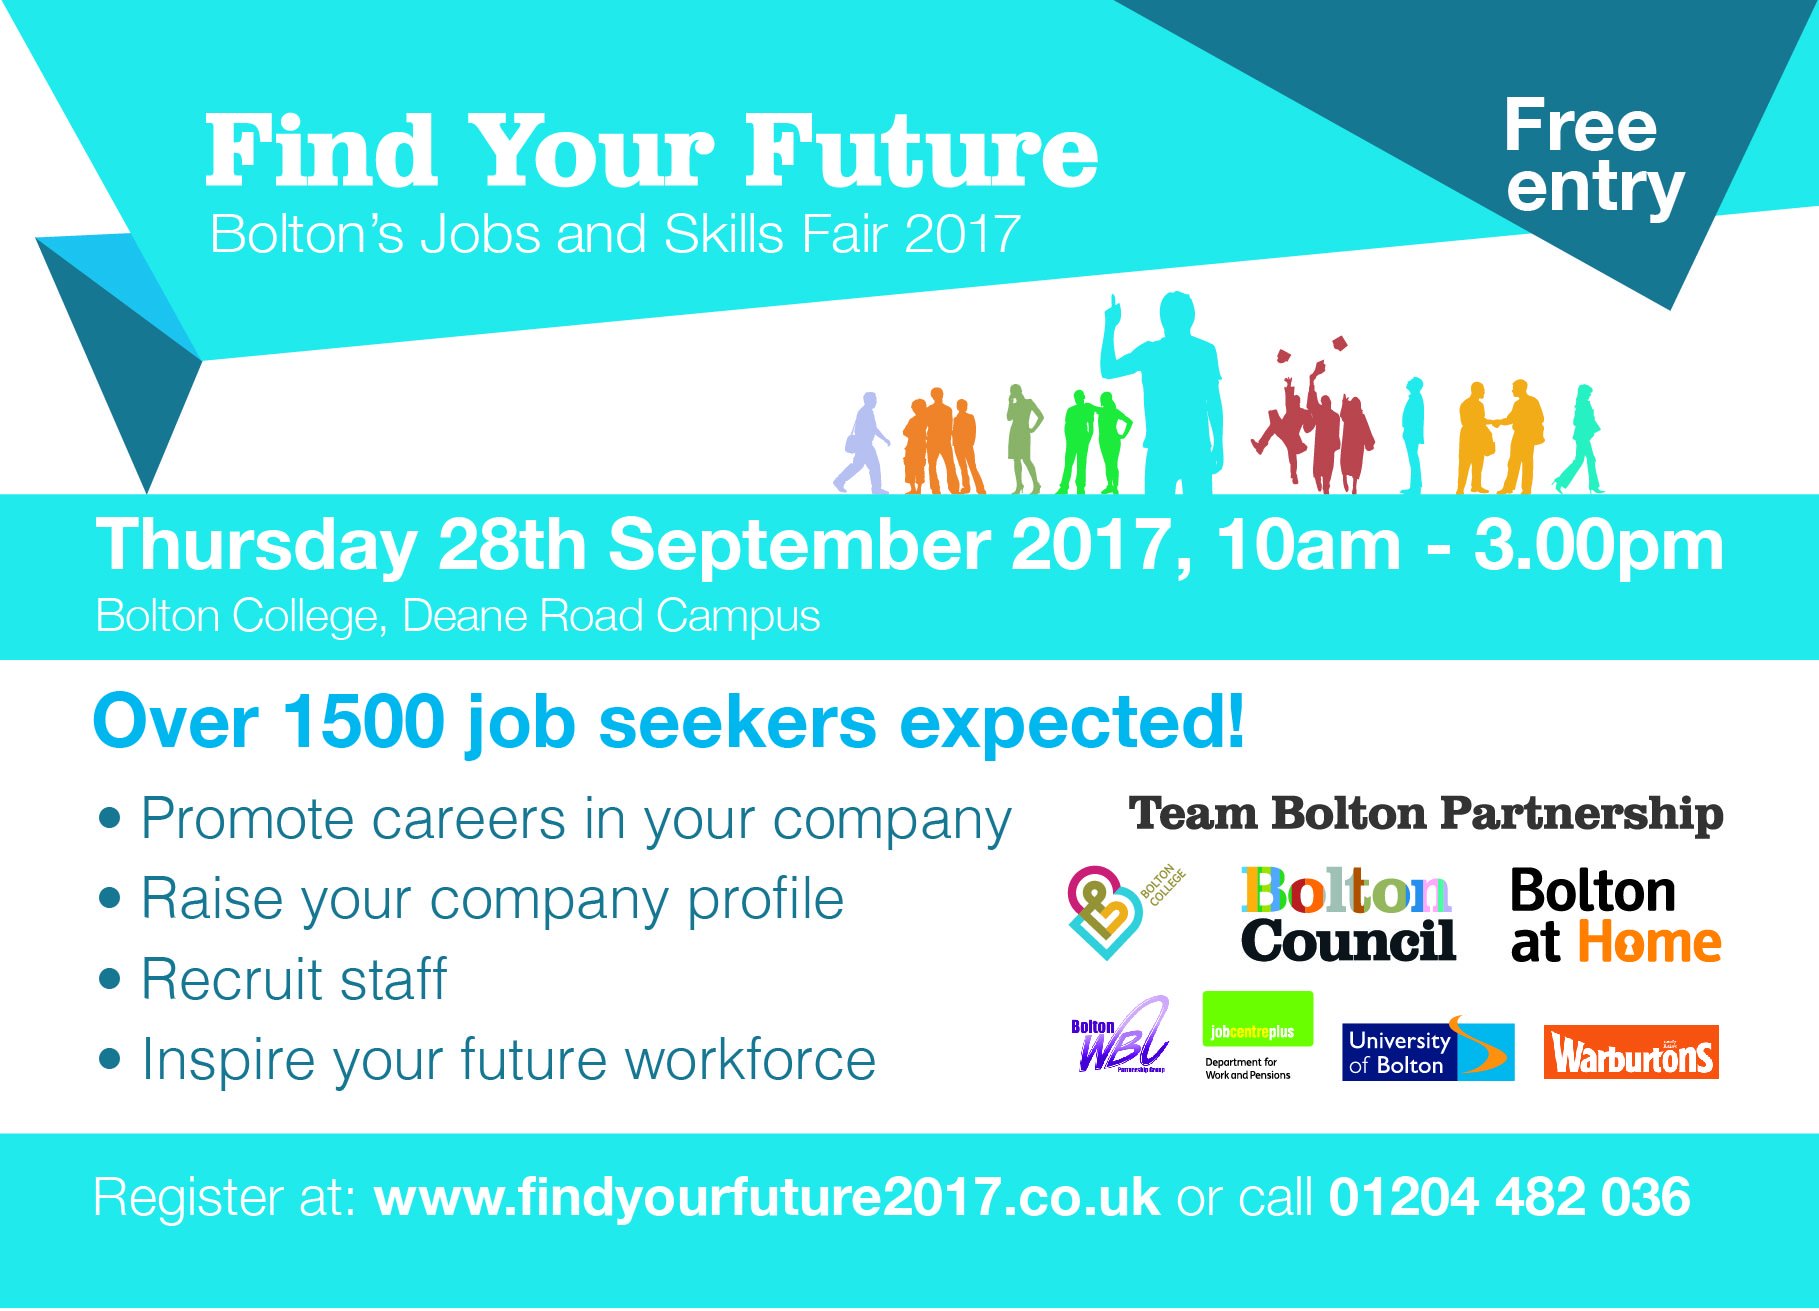 Business Bolton on Twitter "Mark the 28th Sept in your diary for the